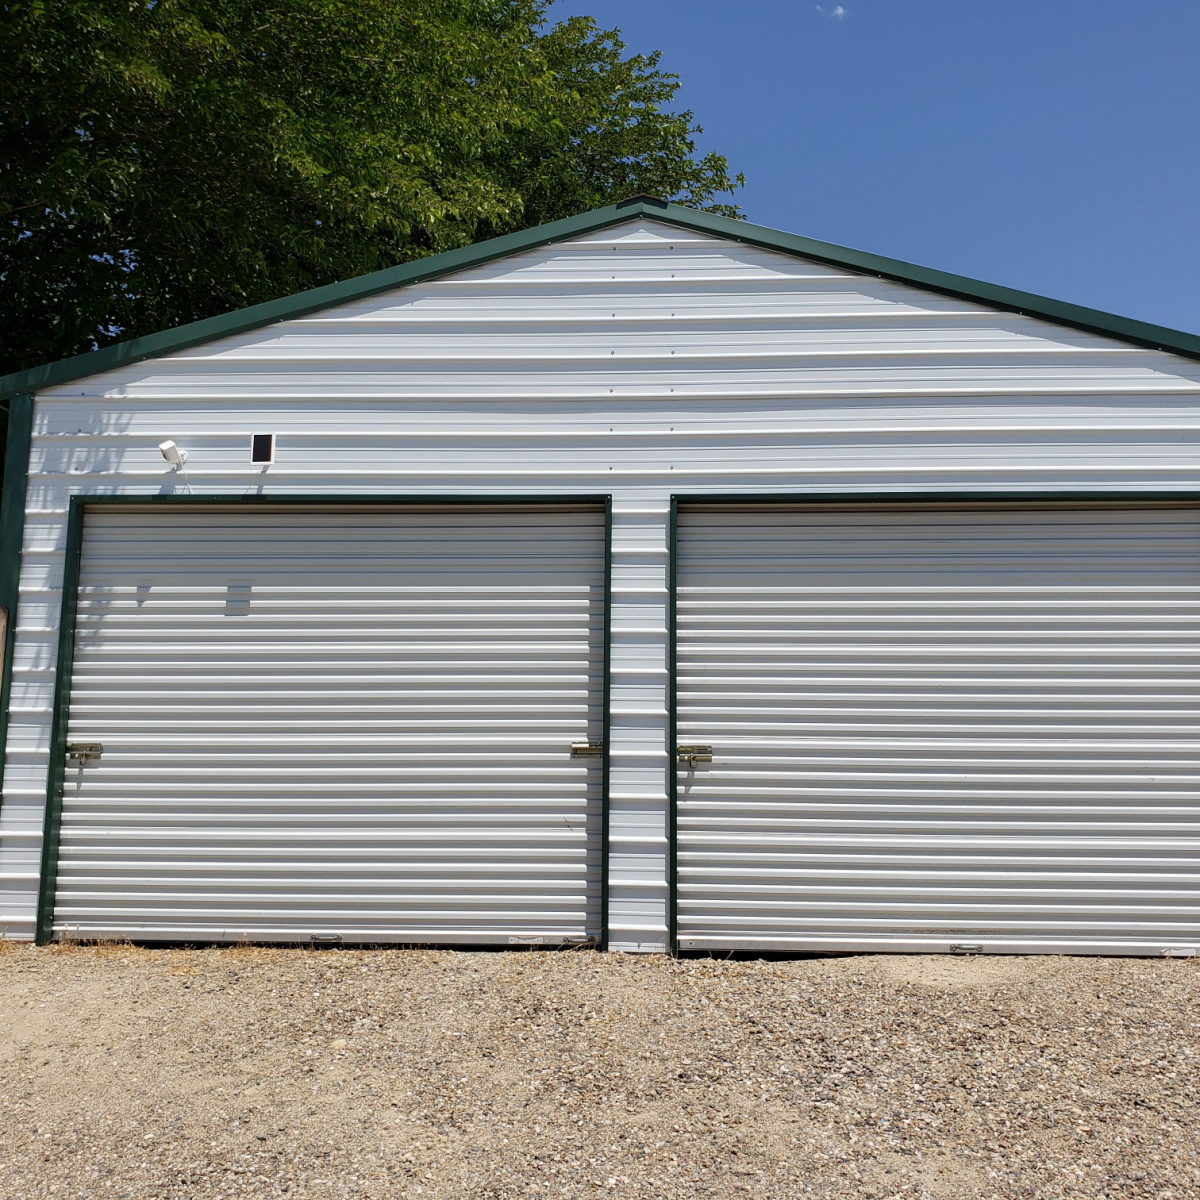 A metal garage on residential property